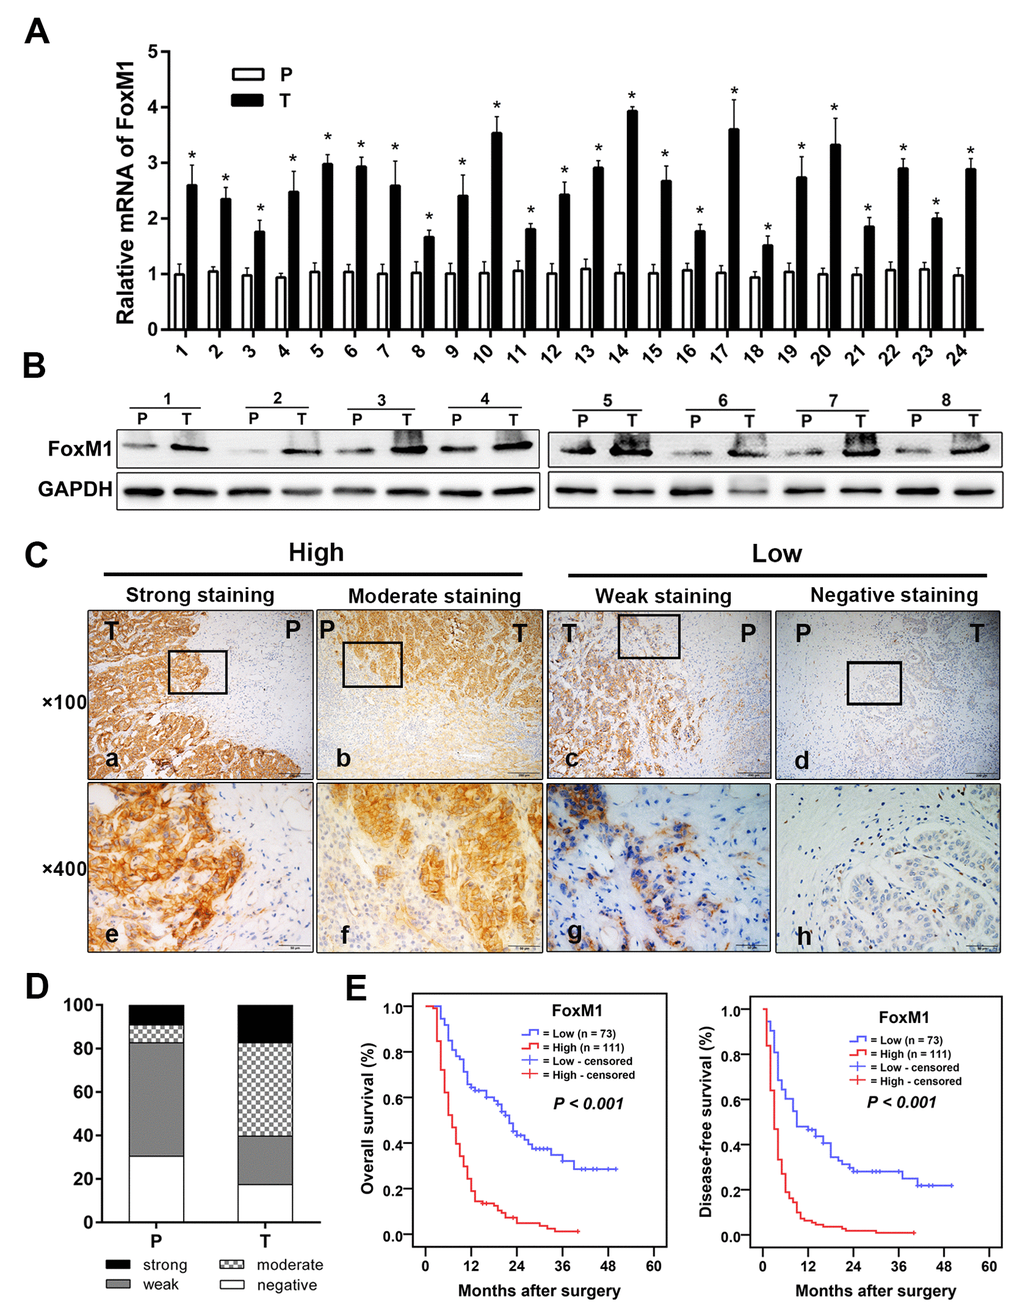 FoxM1 was upregulation in ICC and correlated with survival. The mRNA expression (A) and protein expression (B) of FoxM1 in ICC tumor tissues compared with the expression in paired peritumoral tissues. (C) Representative immunohistochemical staining images of FoxM1 in ICC. (D) The bar graph shows the statistics for the staining intensity of FoxM1 in 184 ICC tumor samples and paired peritumoral tissues. (E) Kaplan-Meier curves for the overall survival and disease-free survival of 184 patients with ICC according to the expression of FoxM1. Abbreviations: ICC, intrahepatic cholangiocarcinoma; P, peritumoral tissue; T, tumor tissue. *P 